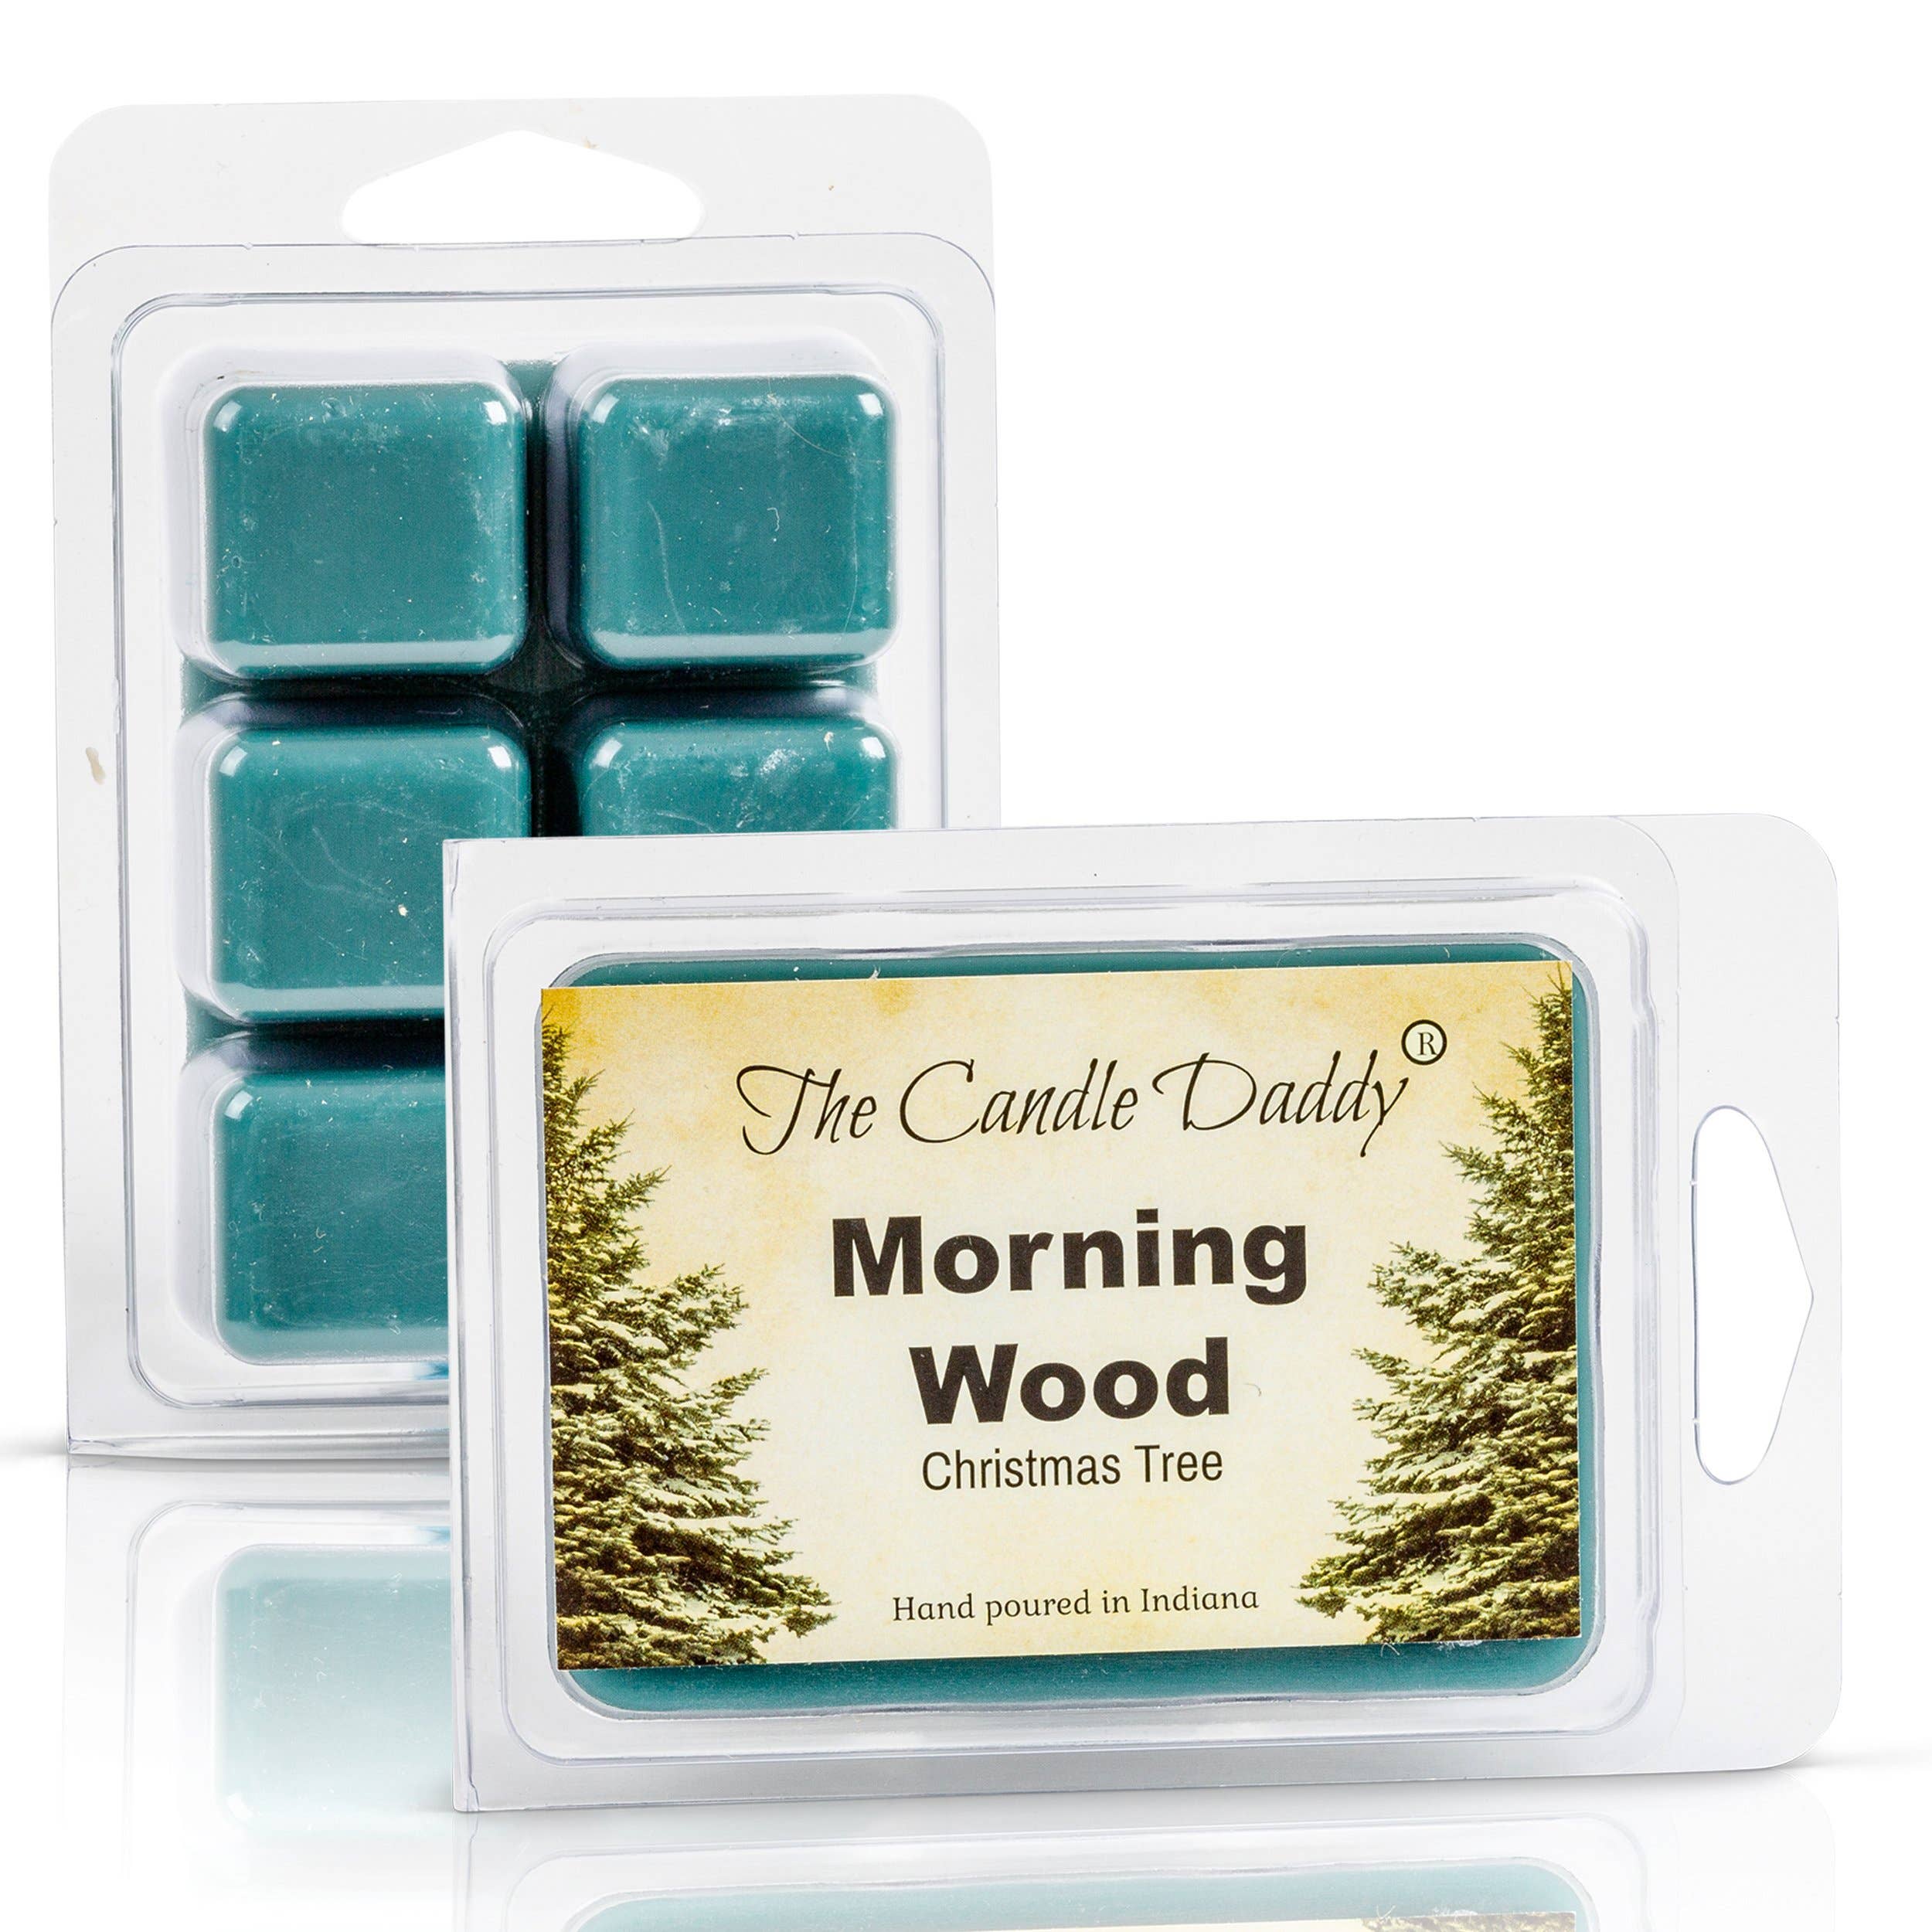 Blue Spruce Christmas Tree scented wax melts